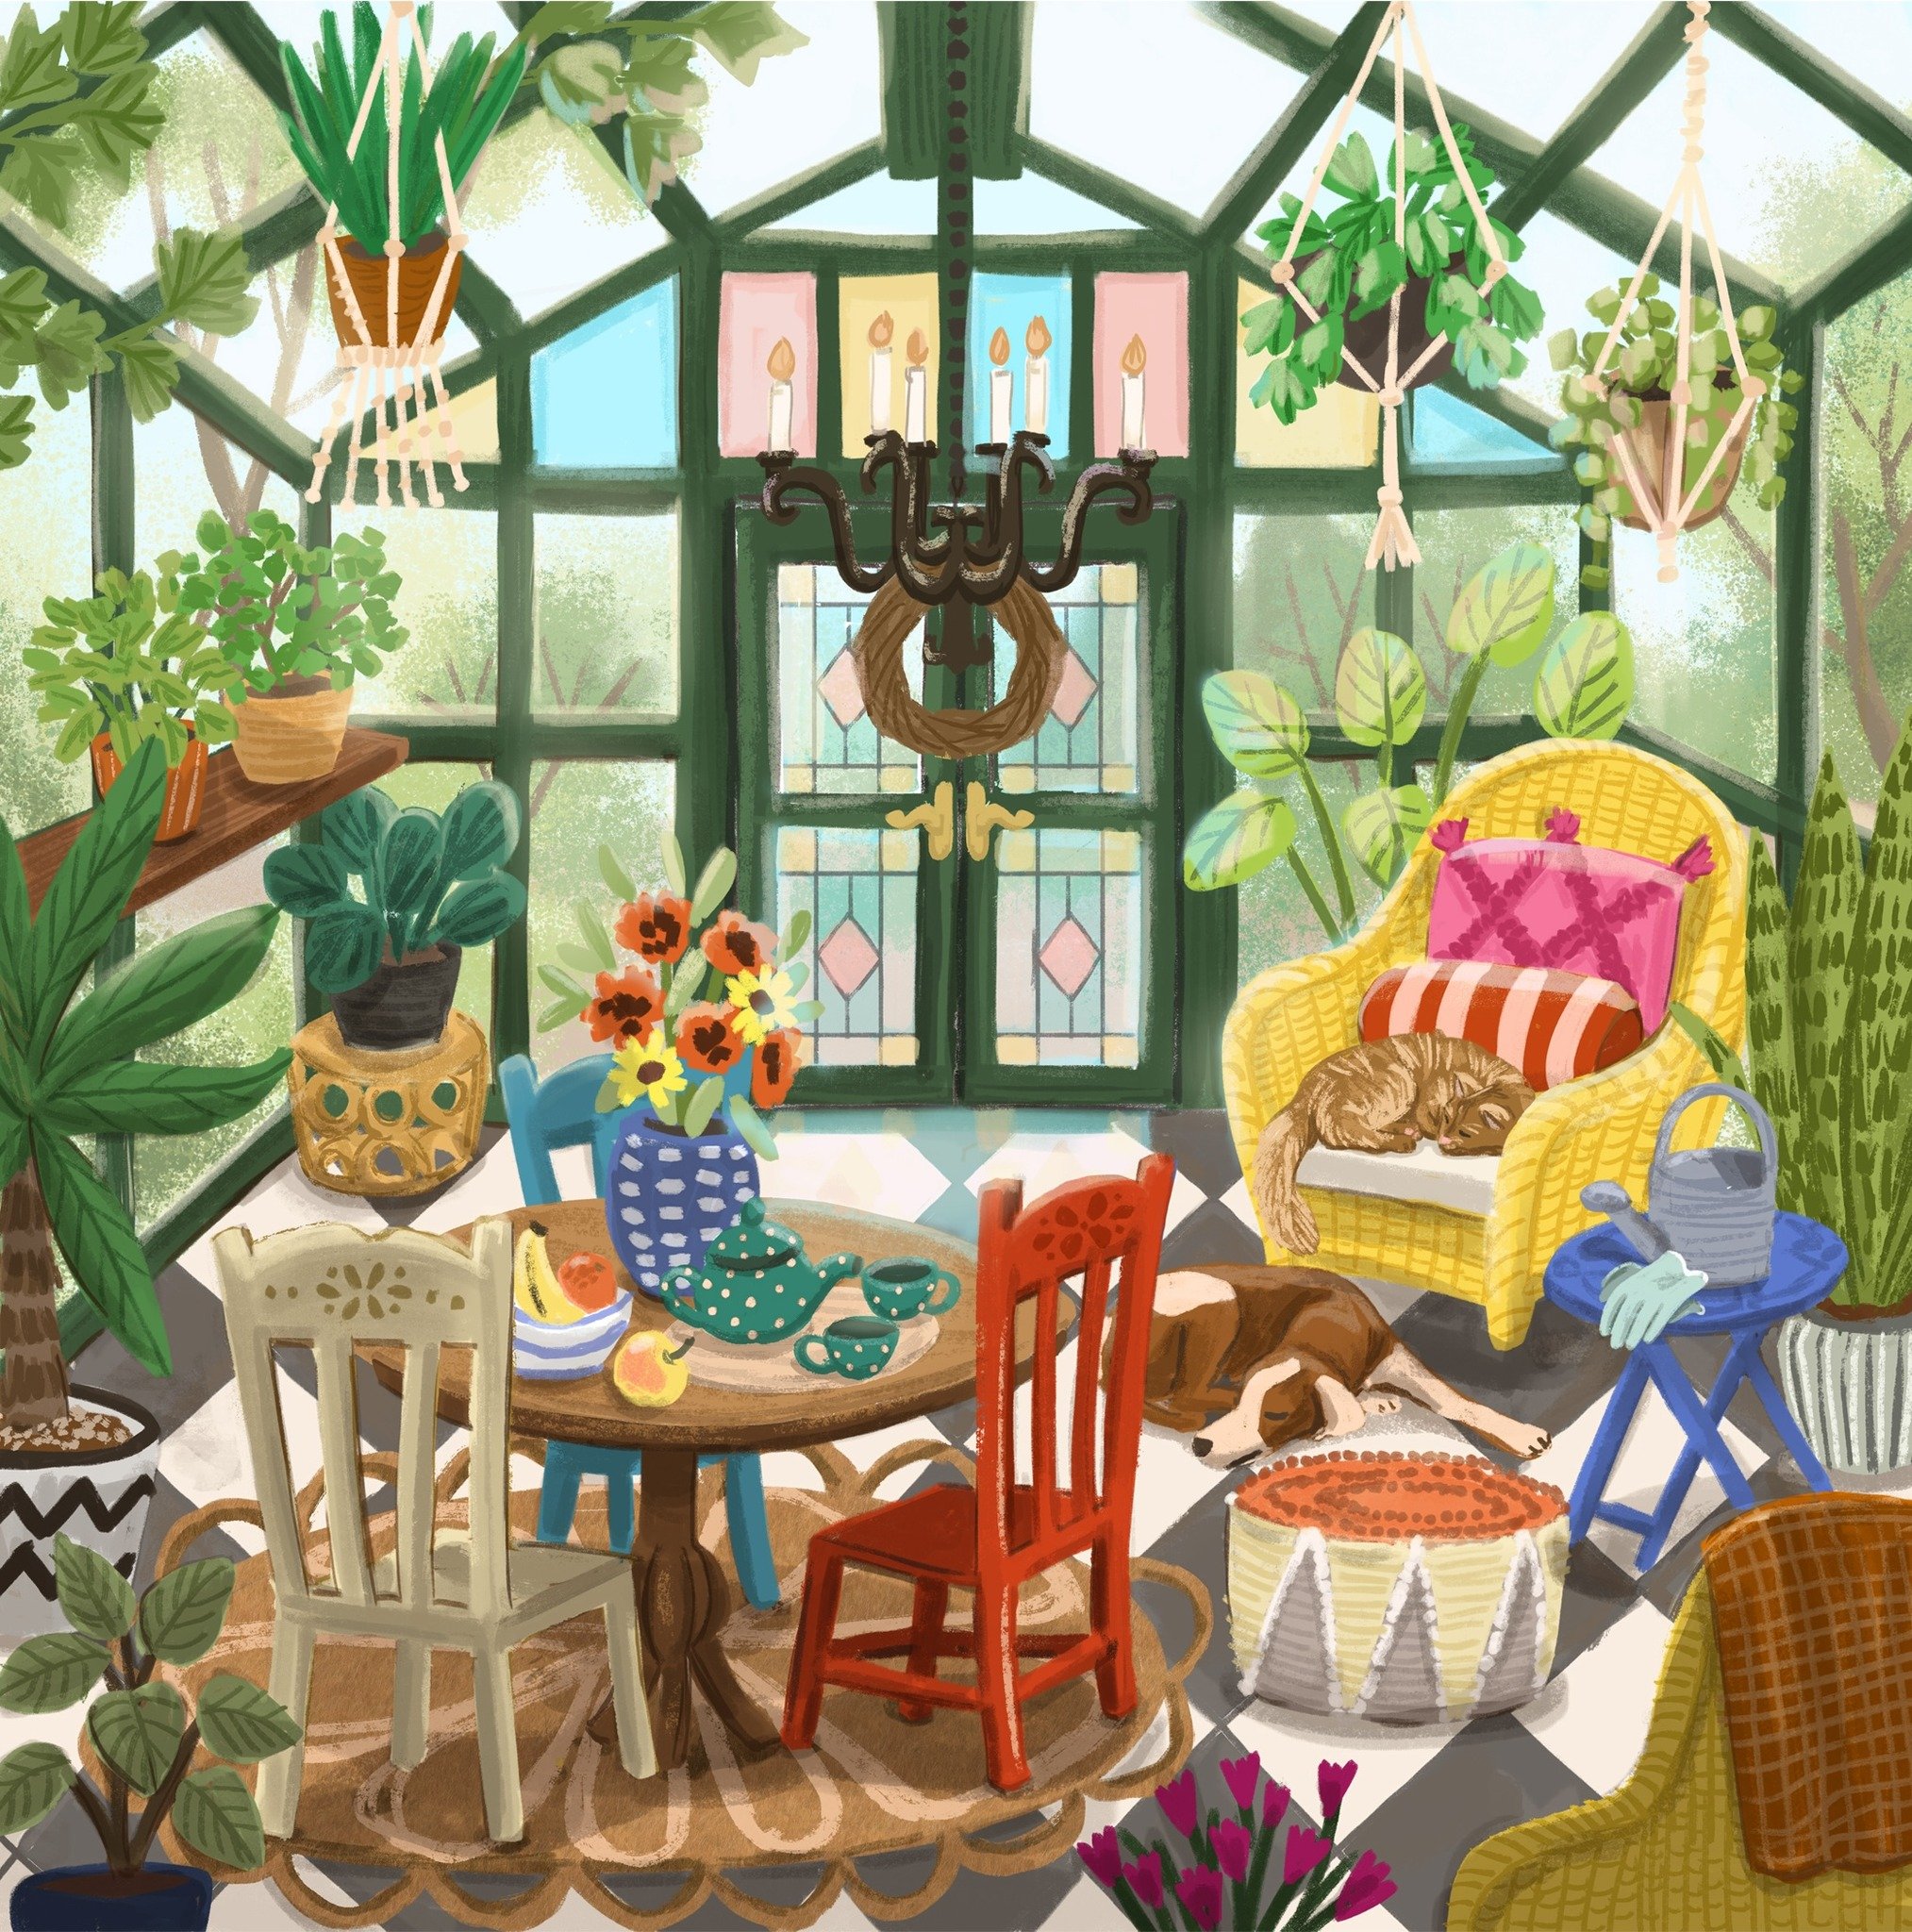 I just want to live in one of these cozy scenes from @oliviagibbsillustration, don't you? 

#surfacedesign #artlicensing #tippitytopbestestartever #artagent #jennifernelsonartists #artagency #surfacedesignagency #floralart #floral #surfacedesigner #f